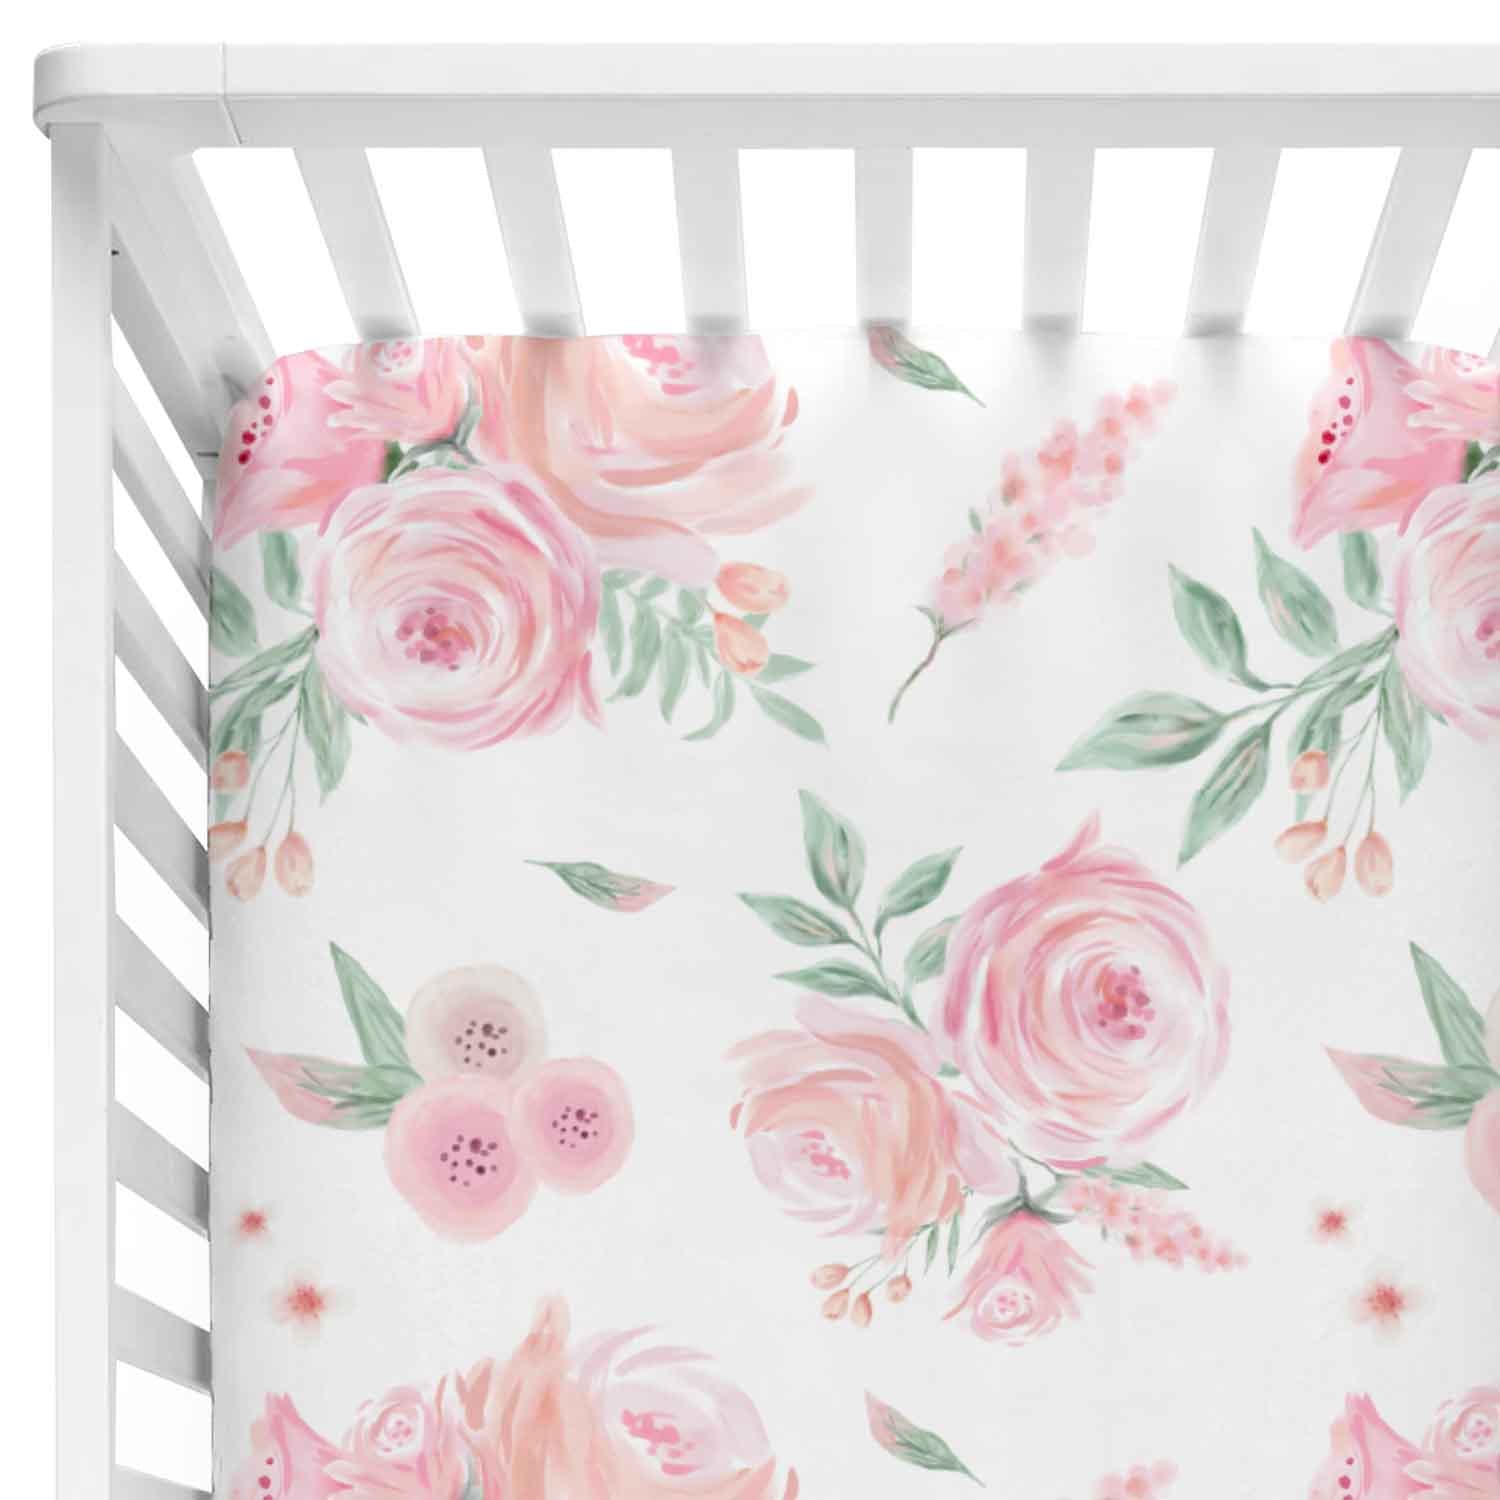 quilted mattress pad for crib